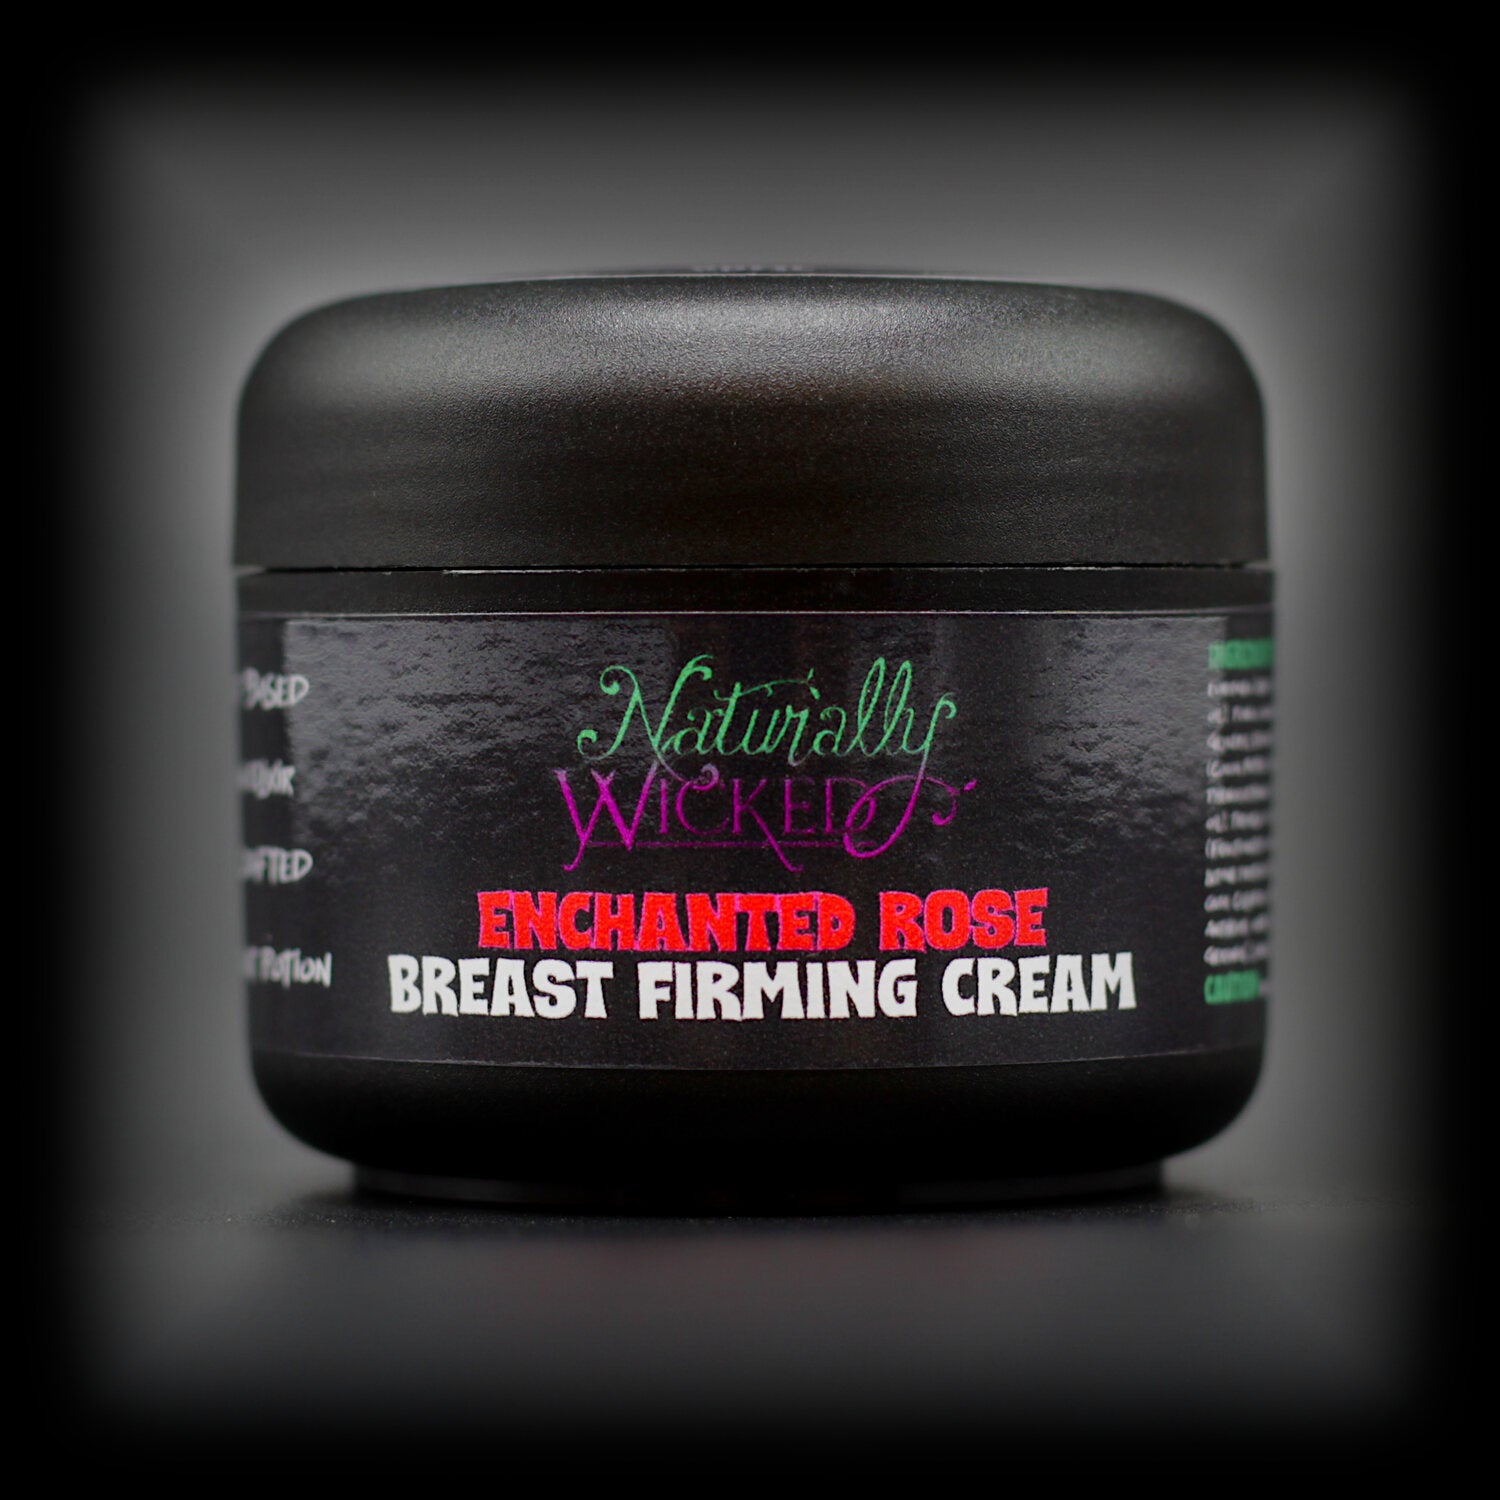 Naturally Wicked Enchanted Rose Breast Firming Cream In Luxury Black Skincare Container